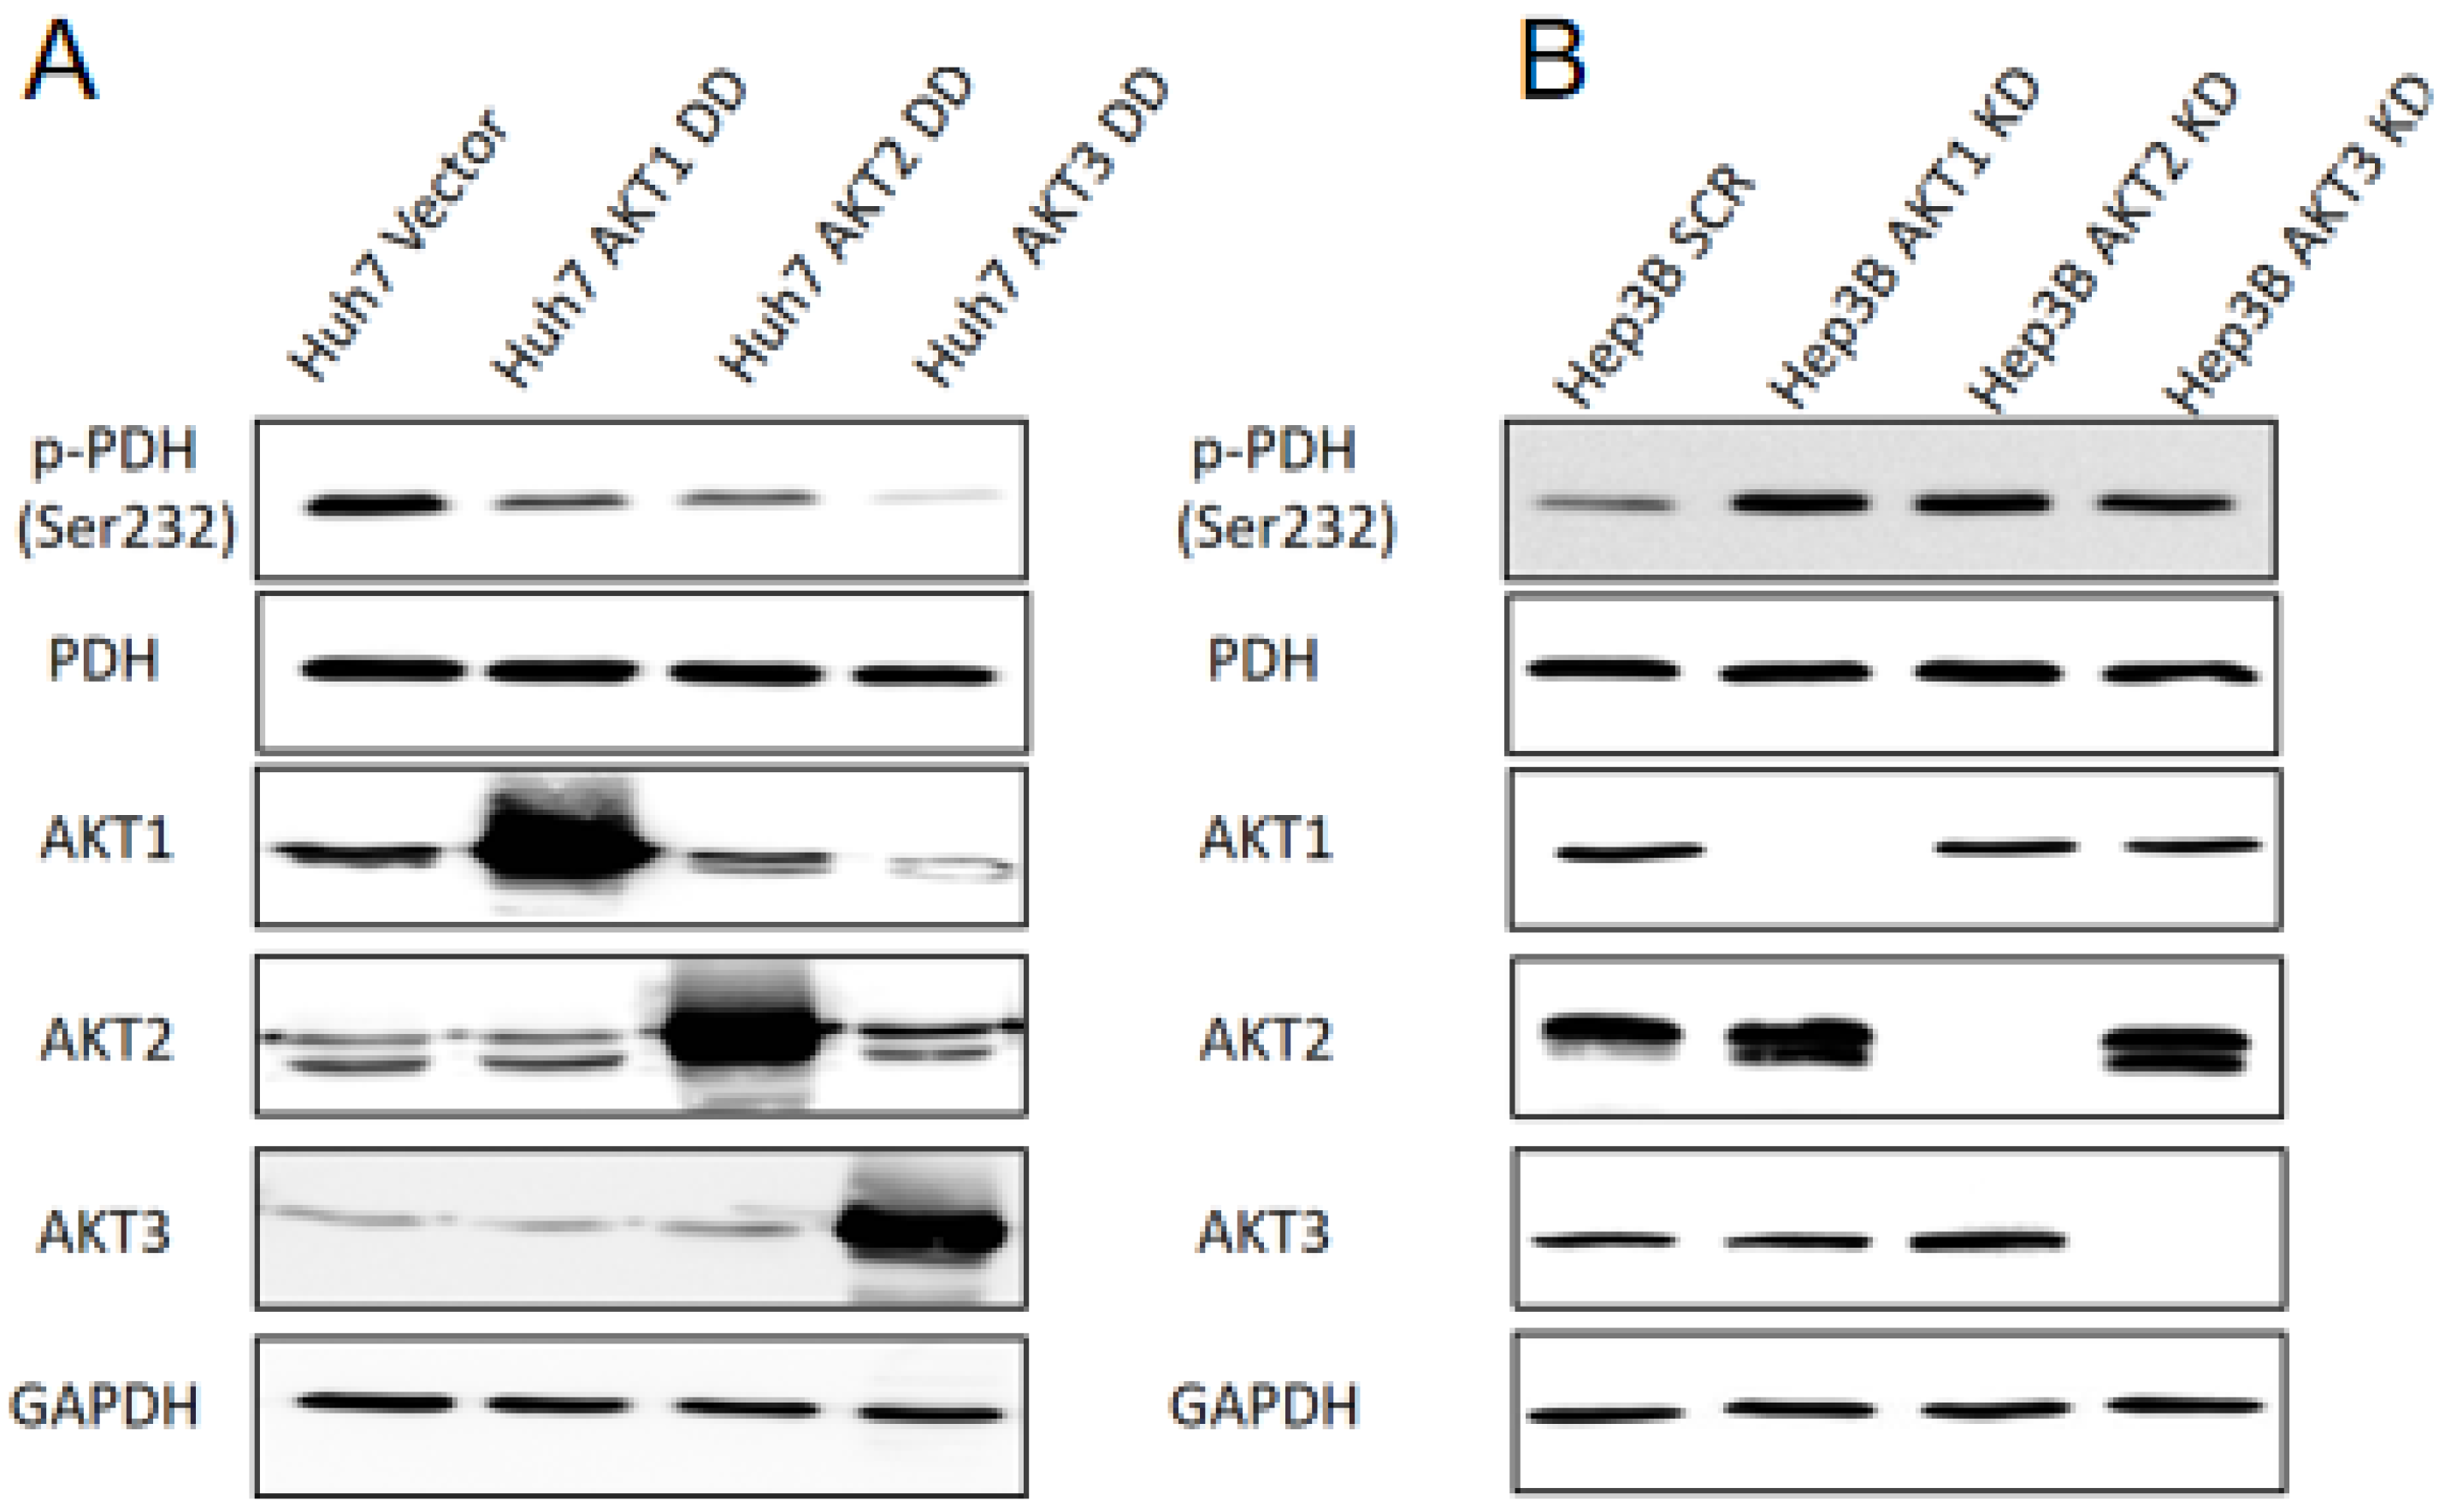 IJMS | Free Full-Text | All Three AKT Isoforms Can Upregulate 